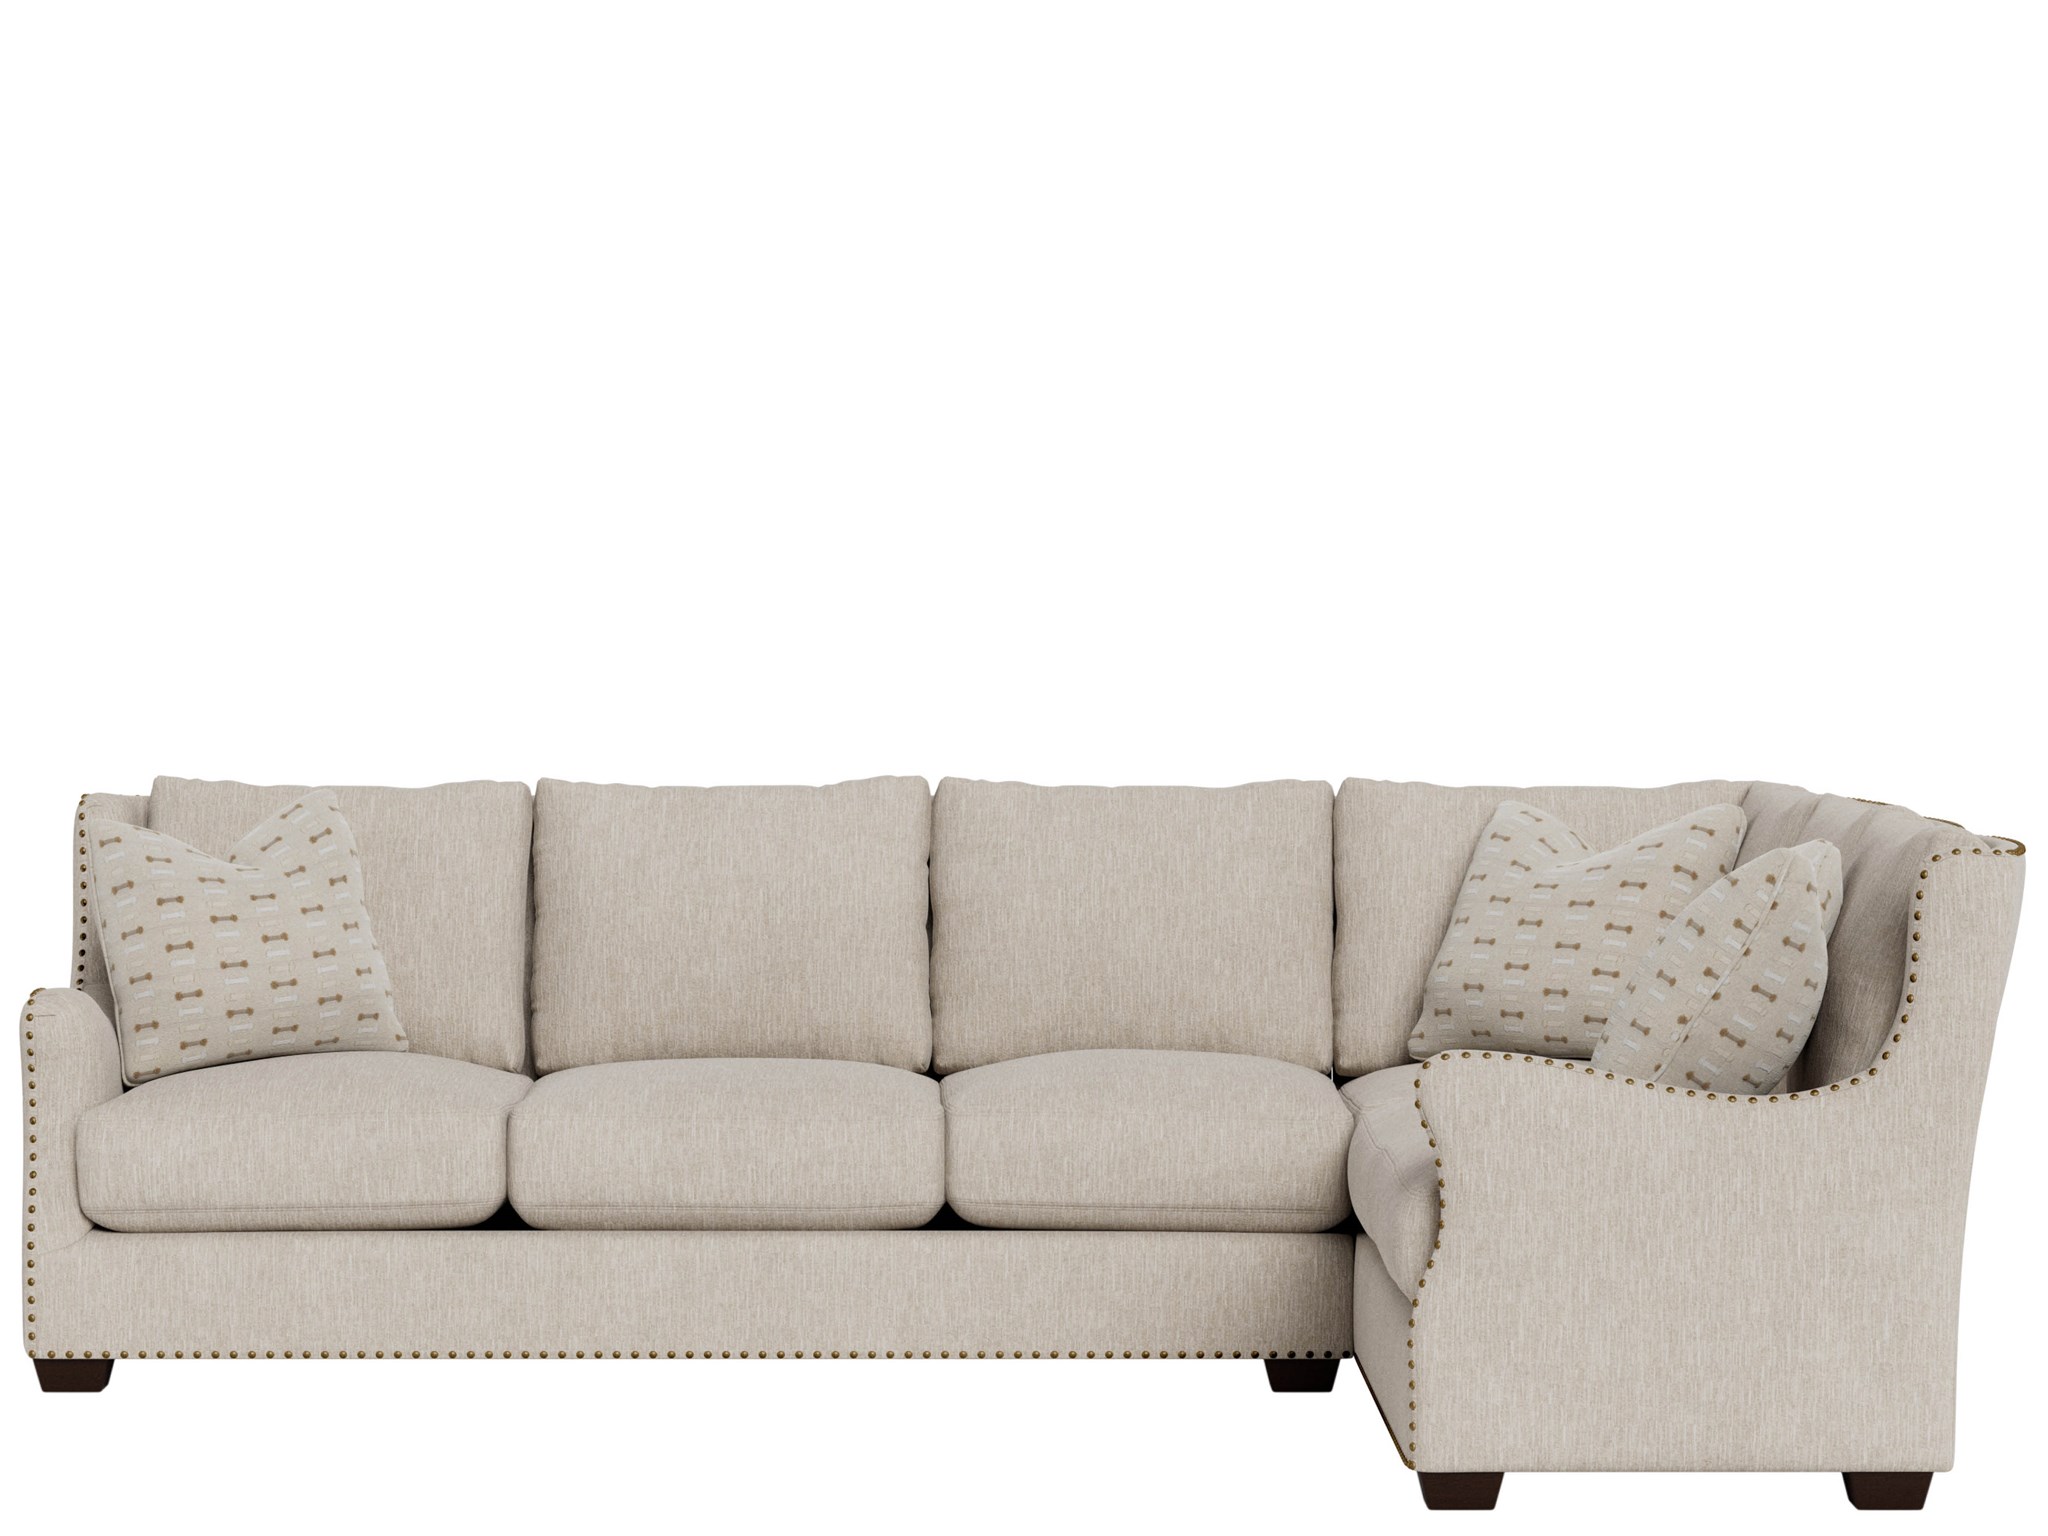 Connor Sectional Left Arm Sofa Right Arm Corner